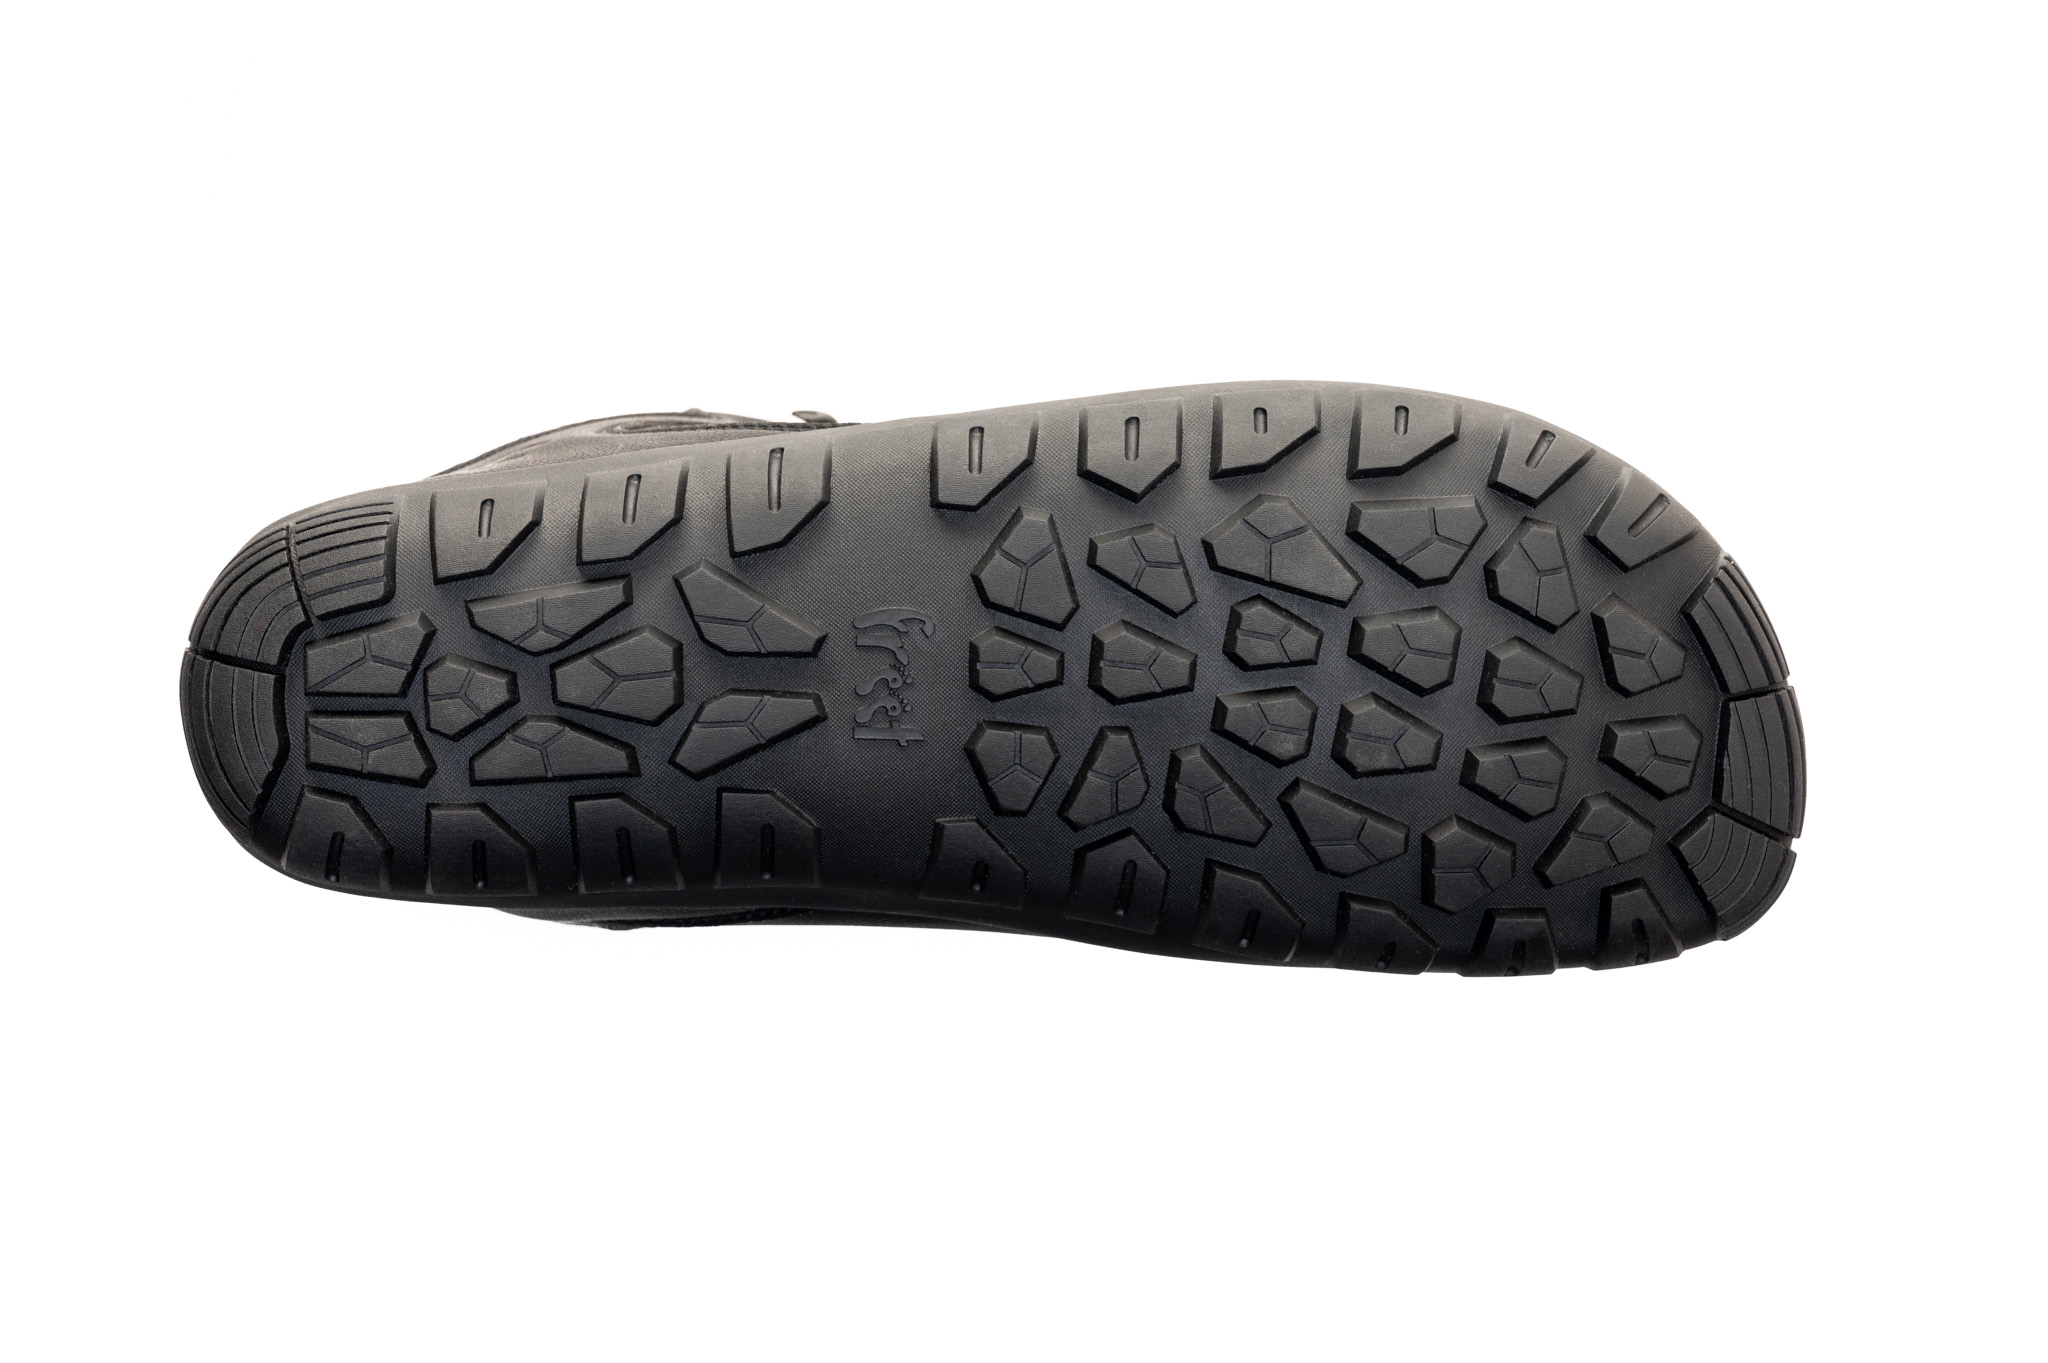 Hill-Grip-outsole-Tundra